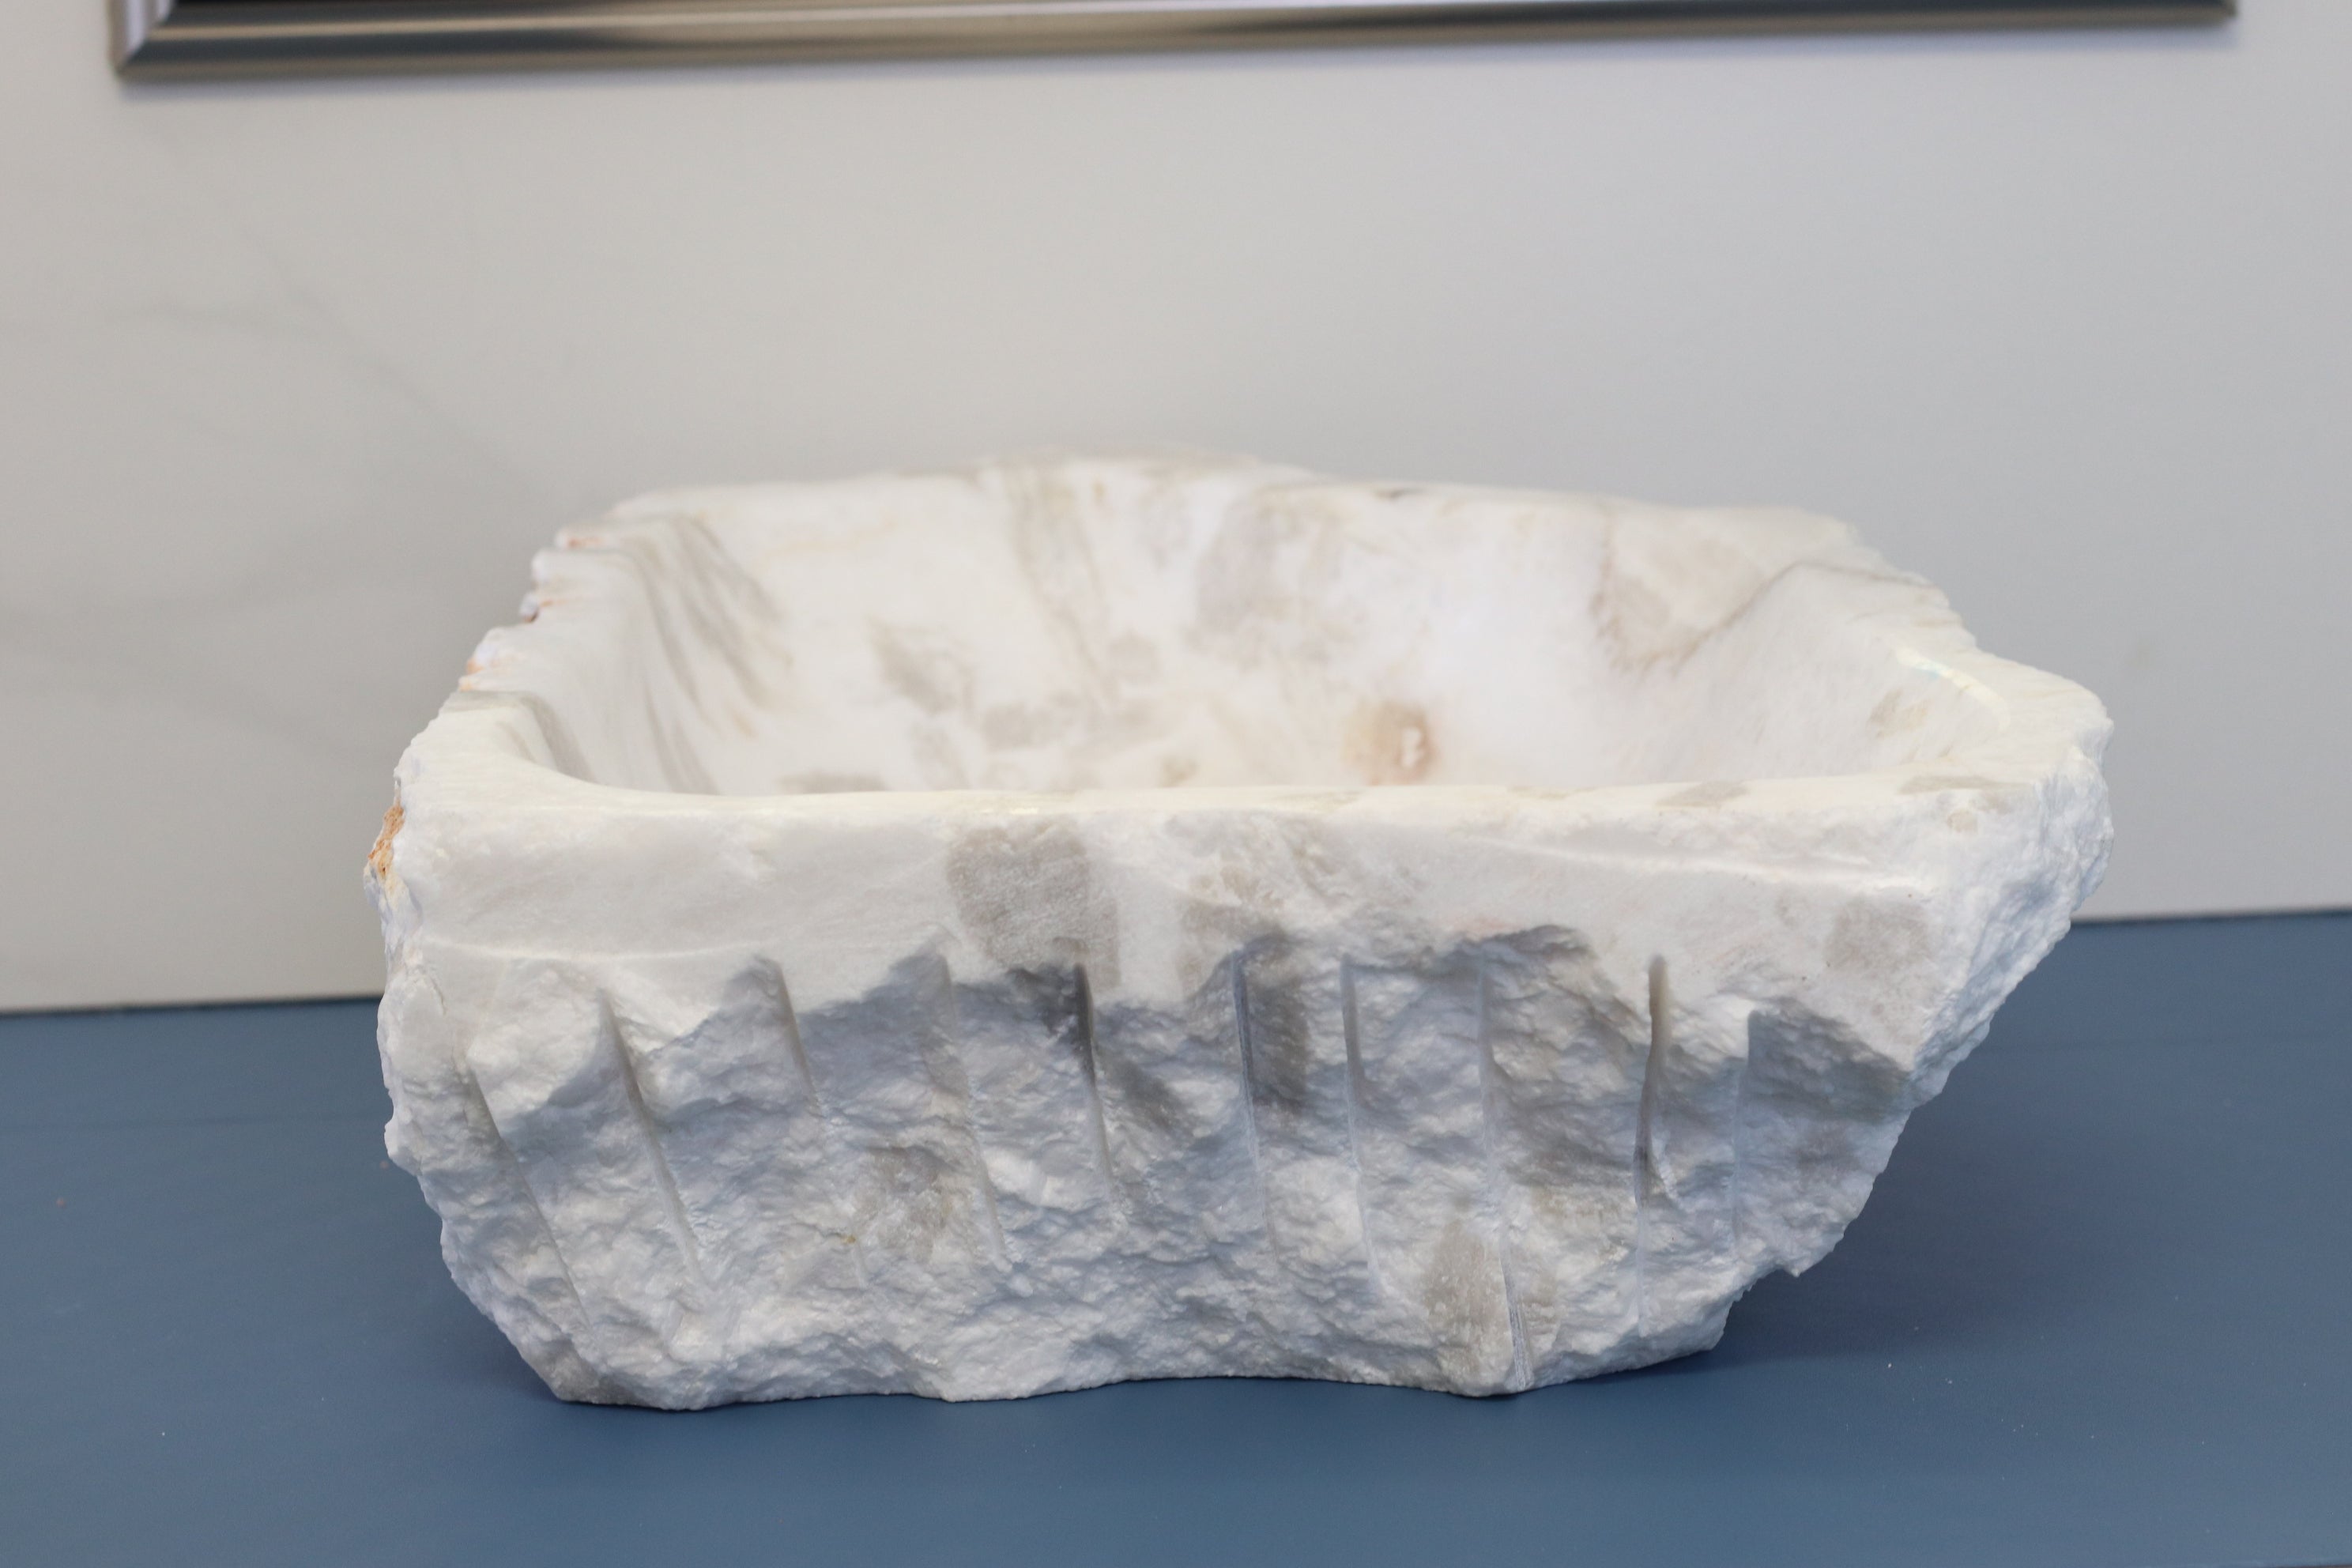 White and Gray Onyx Vessel Sink. A beautiful work of art. We offer fast shipping. Handmade in Mexico. We hand finish, package, and ship from the USA. Buy now at www.felipeandgrace.com. 